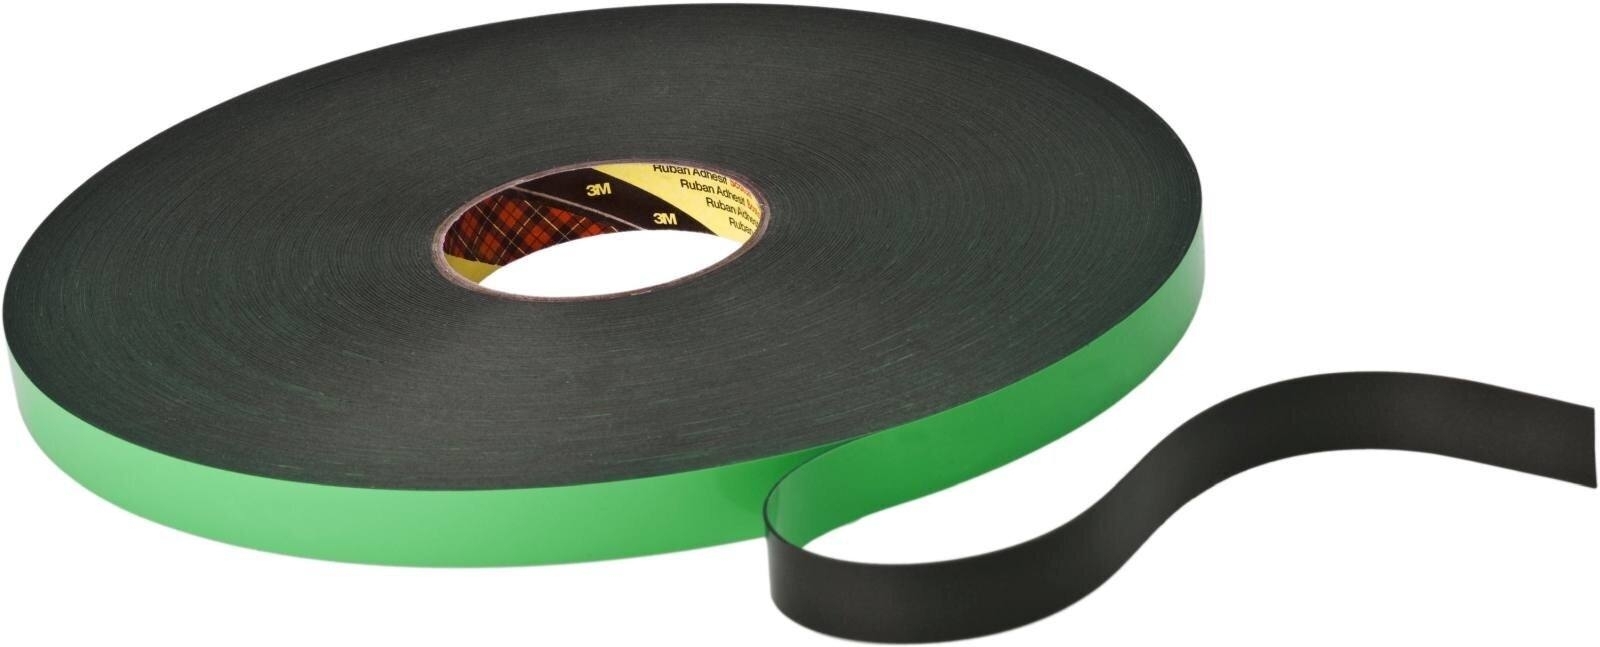 3M Double-sided PE foam tape with acrylic adhesive 9515B, black, 19 mm x 33 m, 1.5 mm